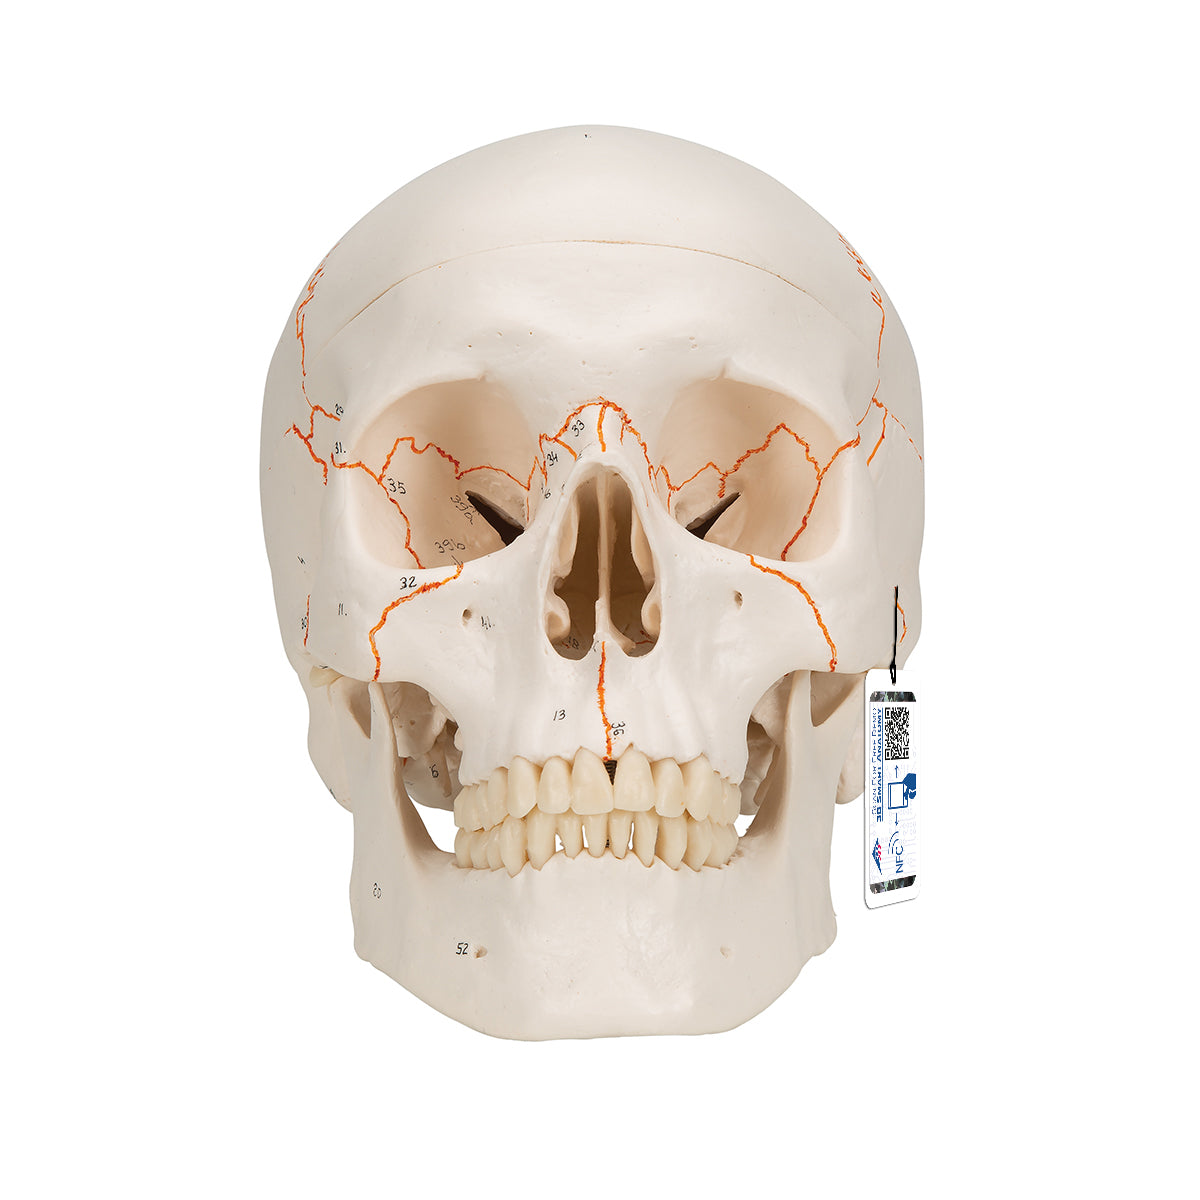 Numbered Human Classic Skull Model, 3 part